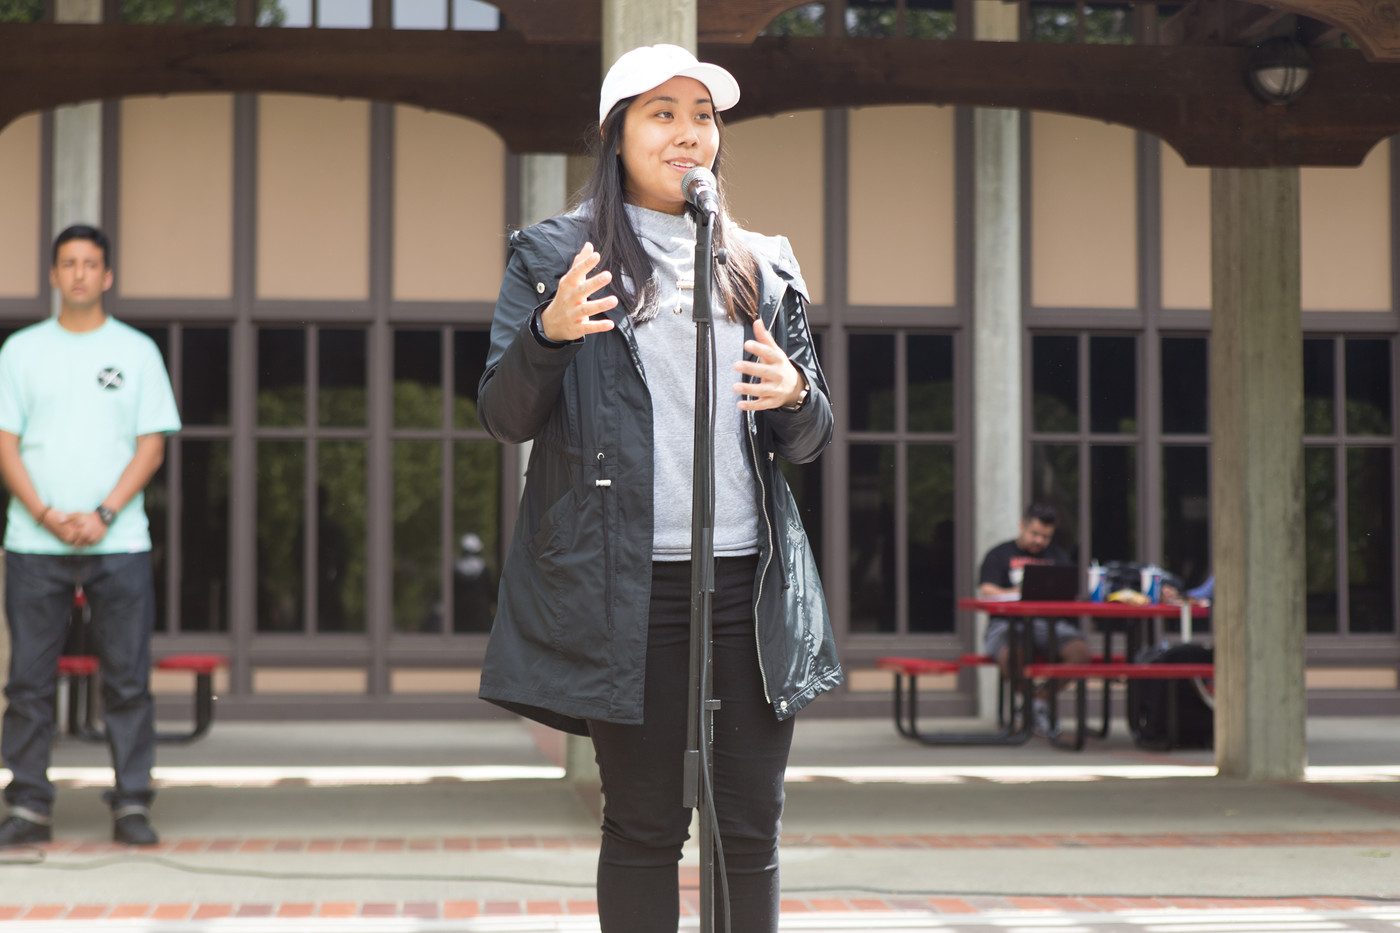 City College student Melody Jimenez, political science major, speaks to students in the Quad during candidate forums April 7, 2016. Jimenez was appointed April 20 as the Student Senate presidential candidate, but must await approval from the 2016-2017 board and Interim President Michael Poindexter.  Hector Flores, Staff Photographer. | hectorfloresexpress@gmail.com